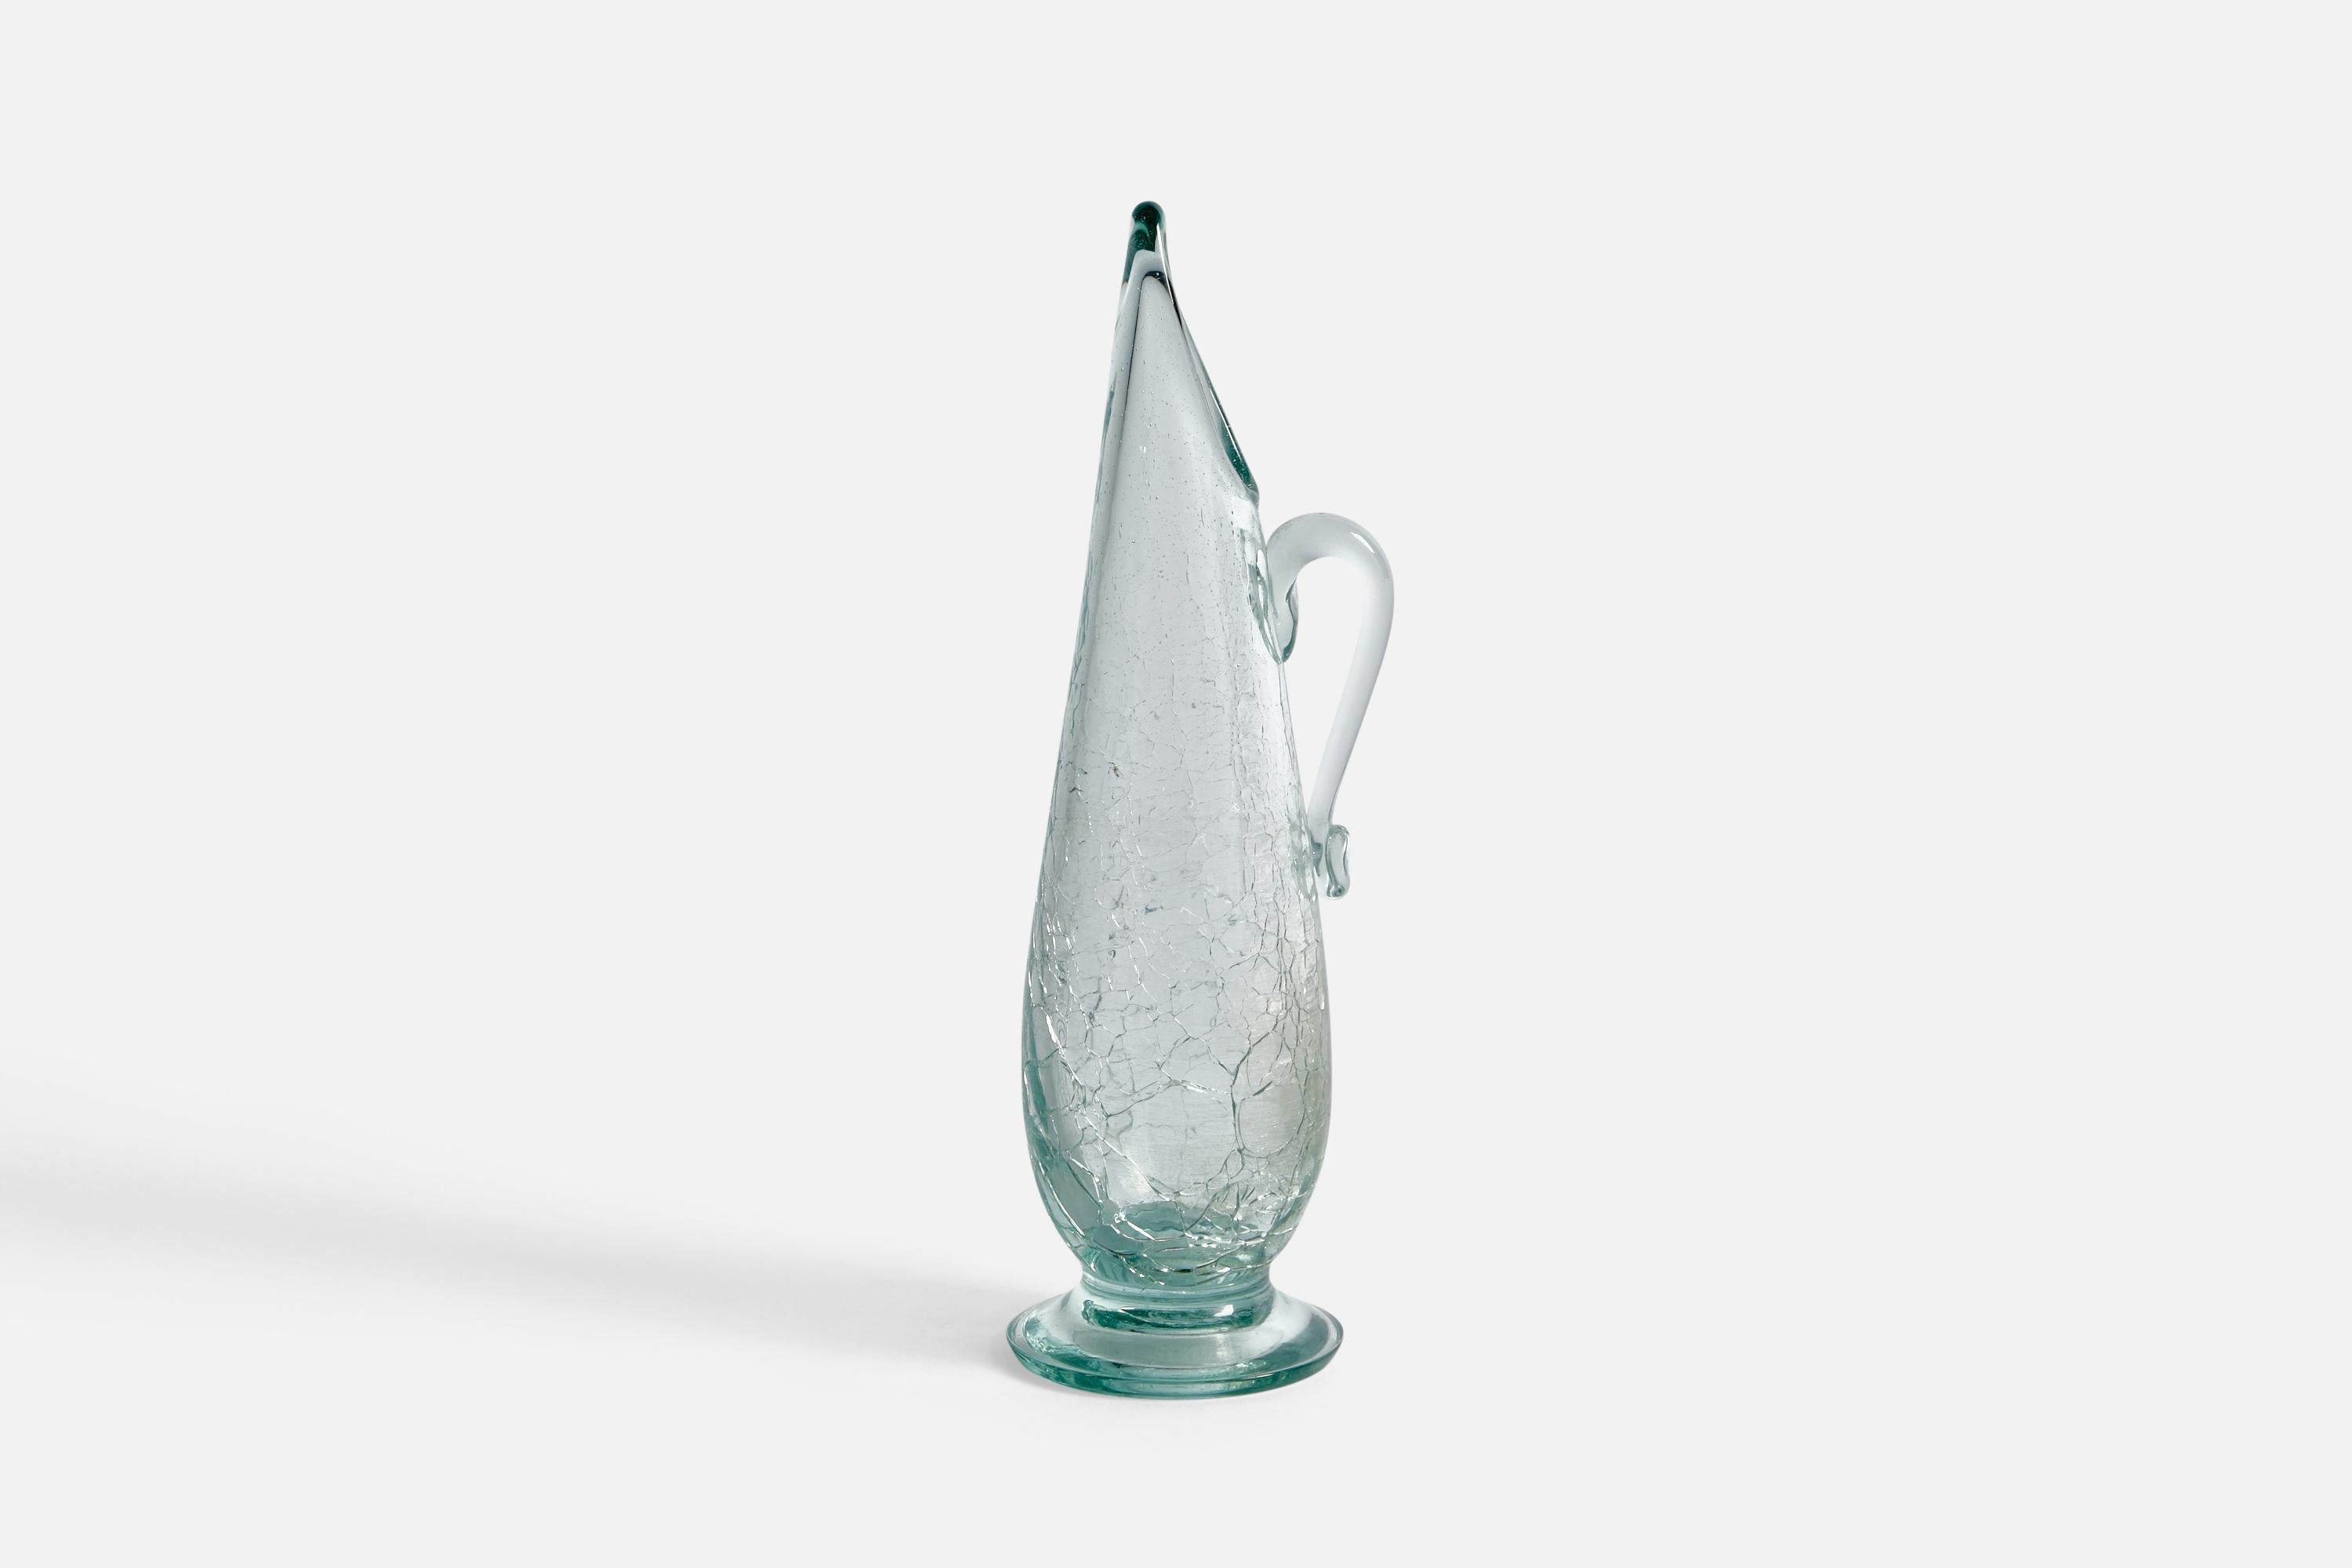 A small blown glass pitcher designed by Ture Berglund and produced by Skansens Glasbruk, Sweden, 1940s.